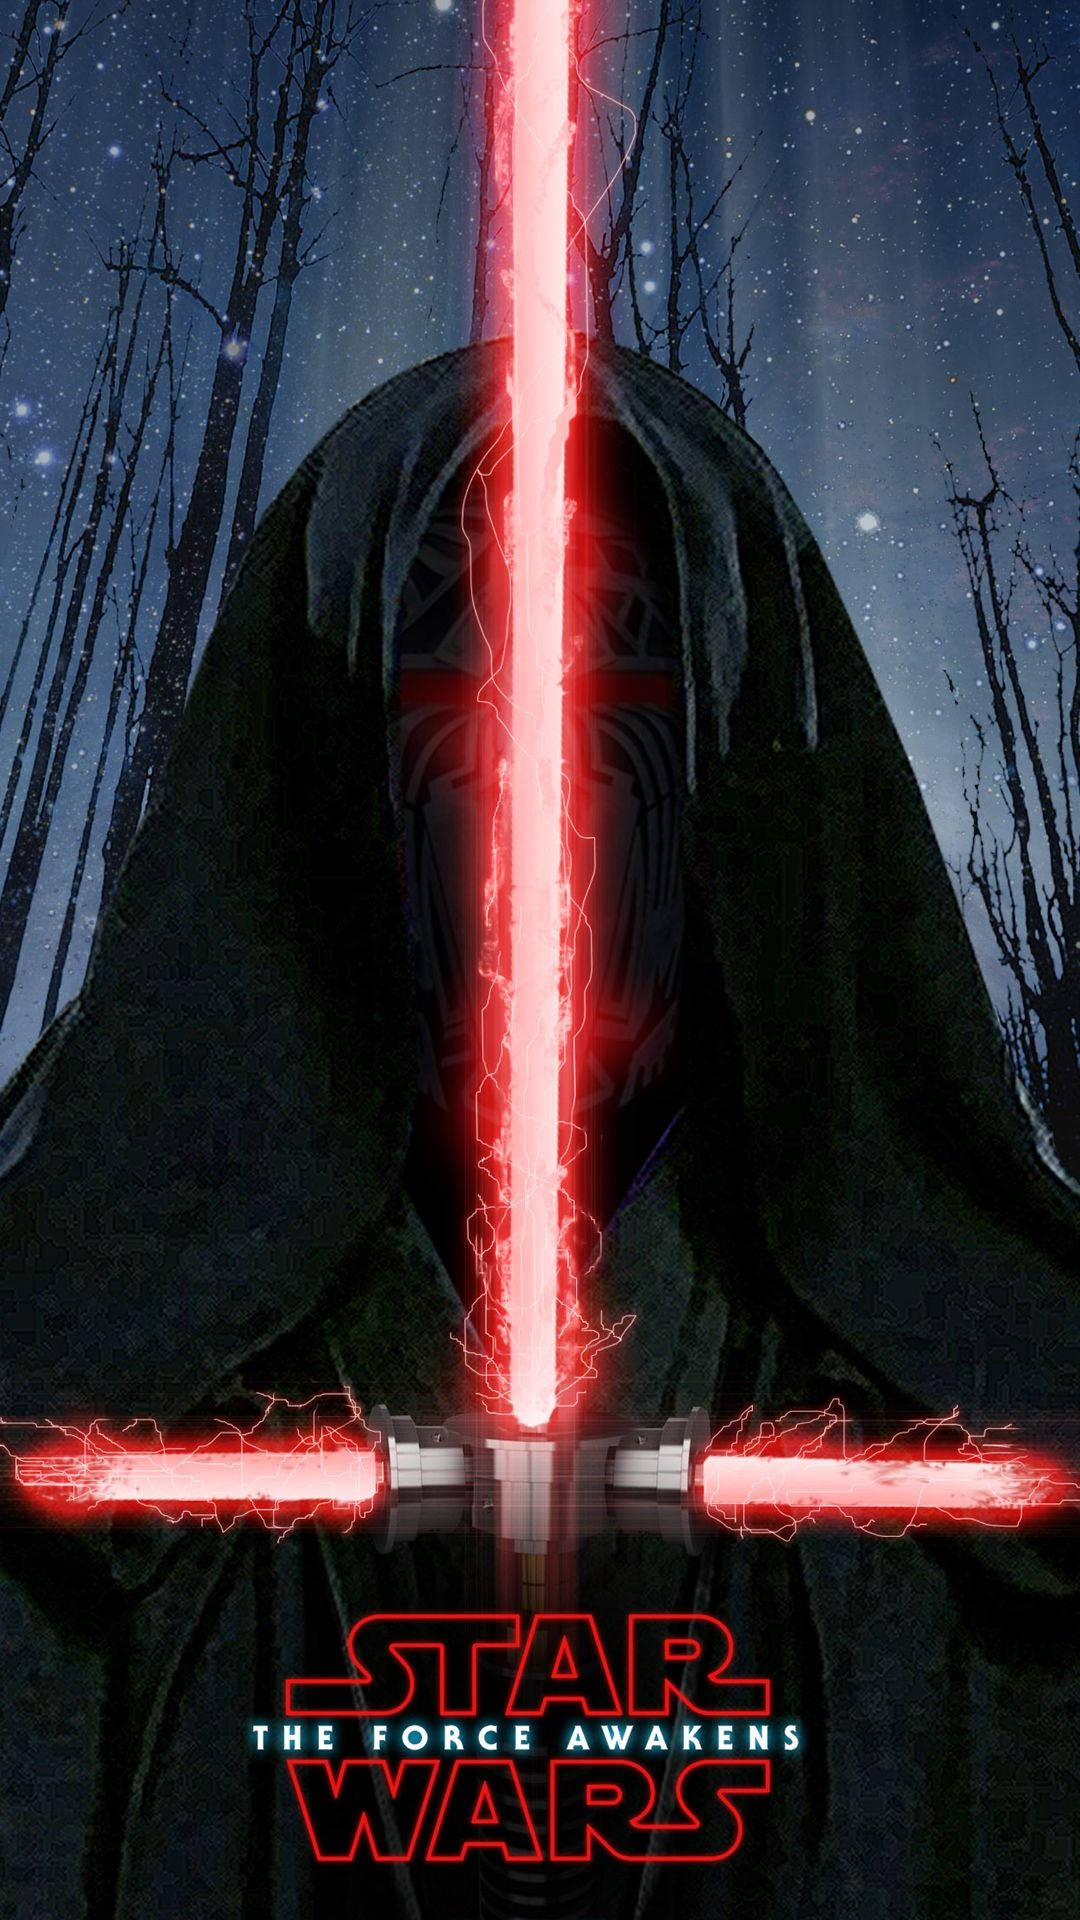 Kylo Ren From Star Wars Cell Phone Wallpaper